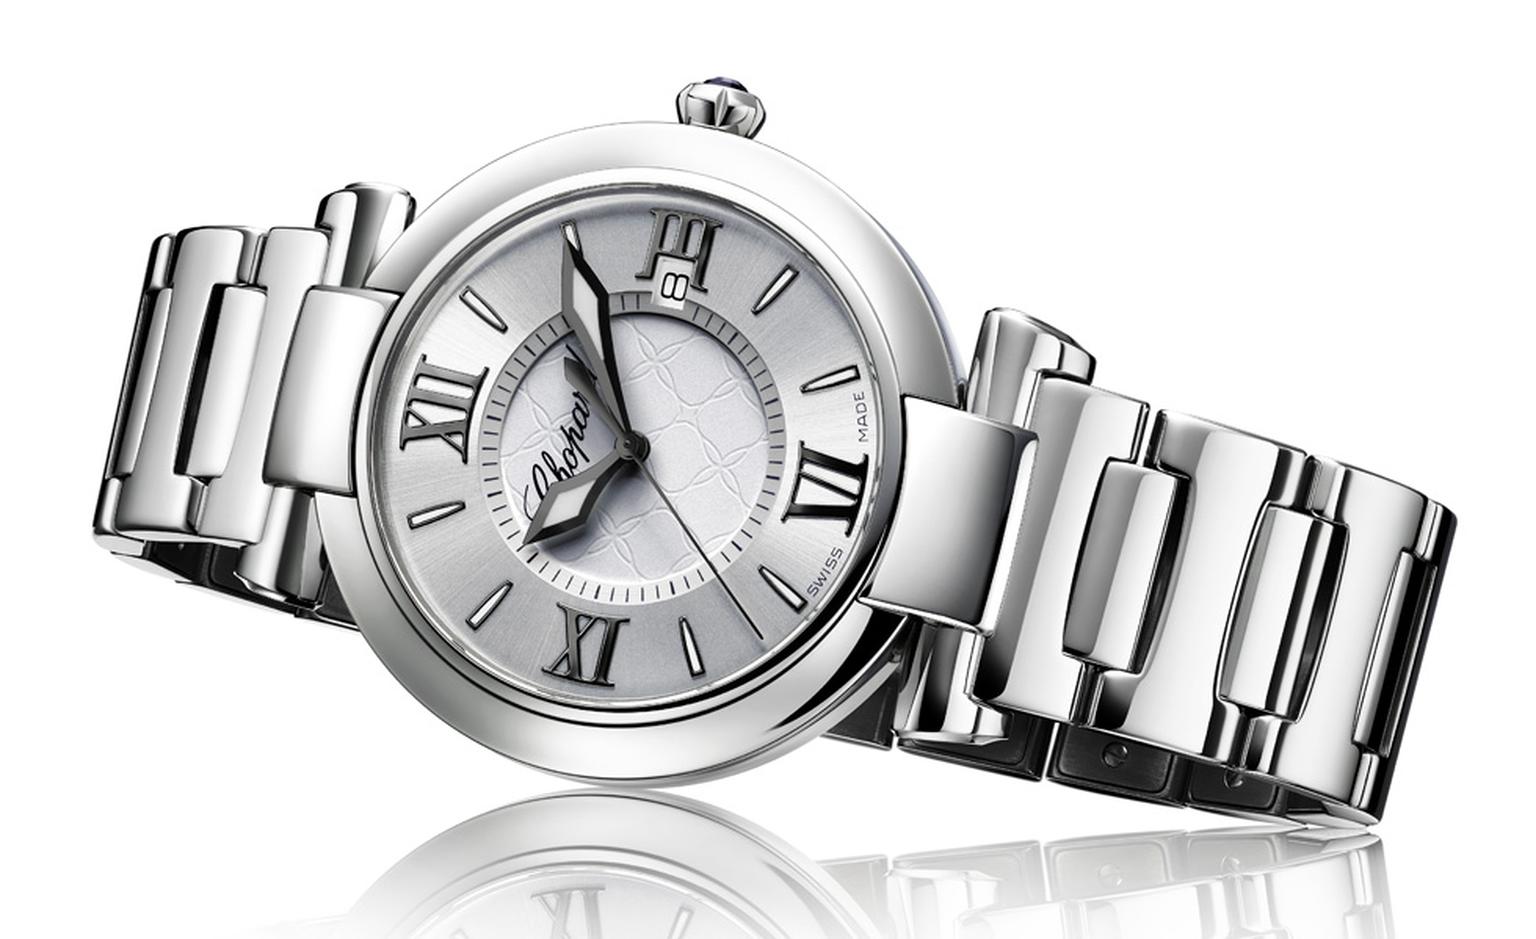 Chopard Imperiale watch in stainless steel